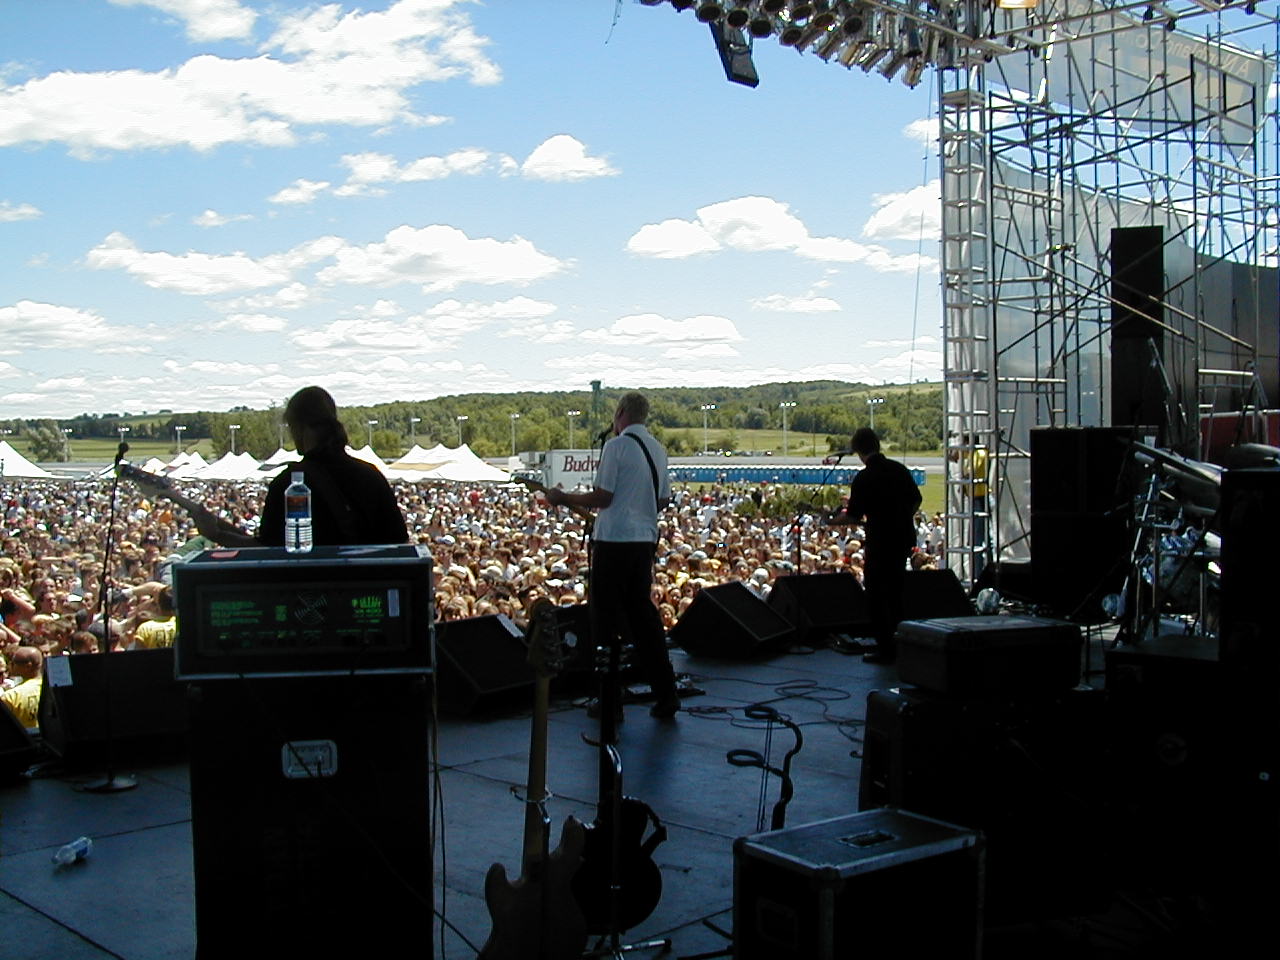 The Uninvited, an American band, perform on stage in front of a huge crowd on a sunny day